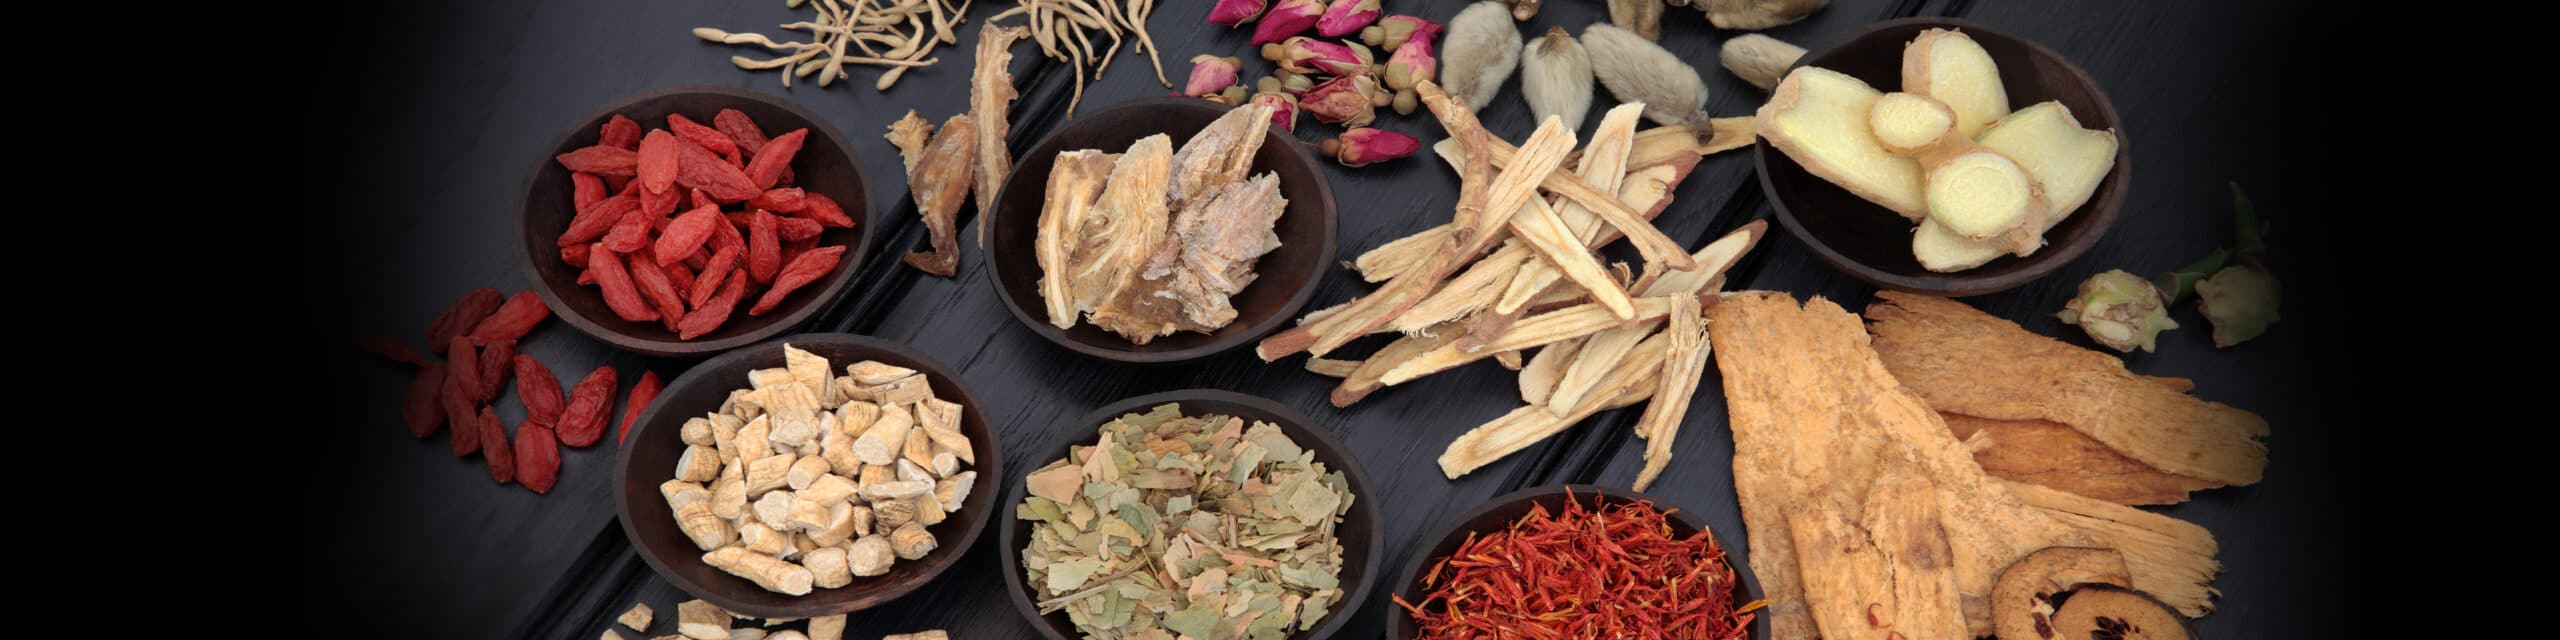 Virtual courses on Chinese herbs and Traditional Chinese Medicine (TCM) - Advanced Herbalist Training